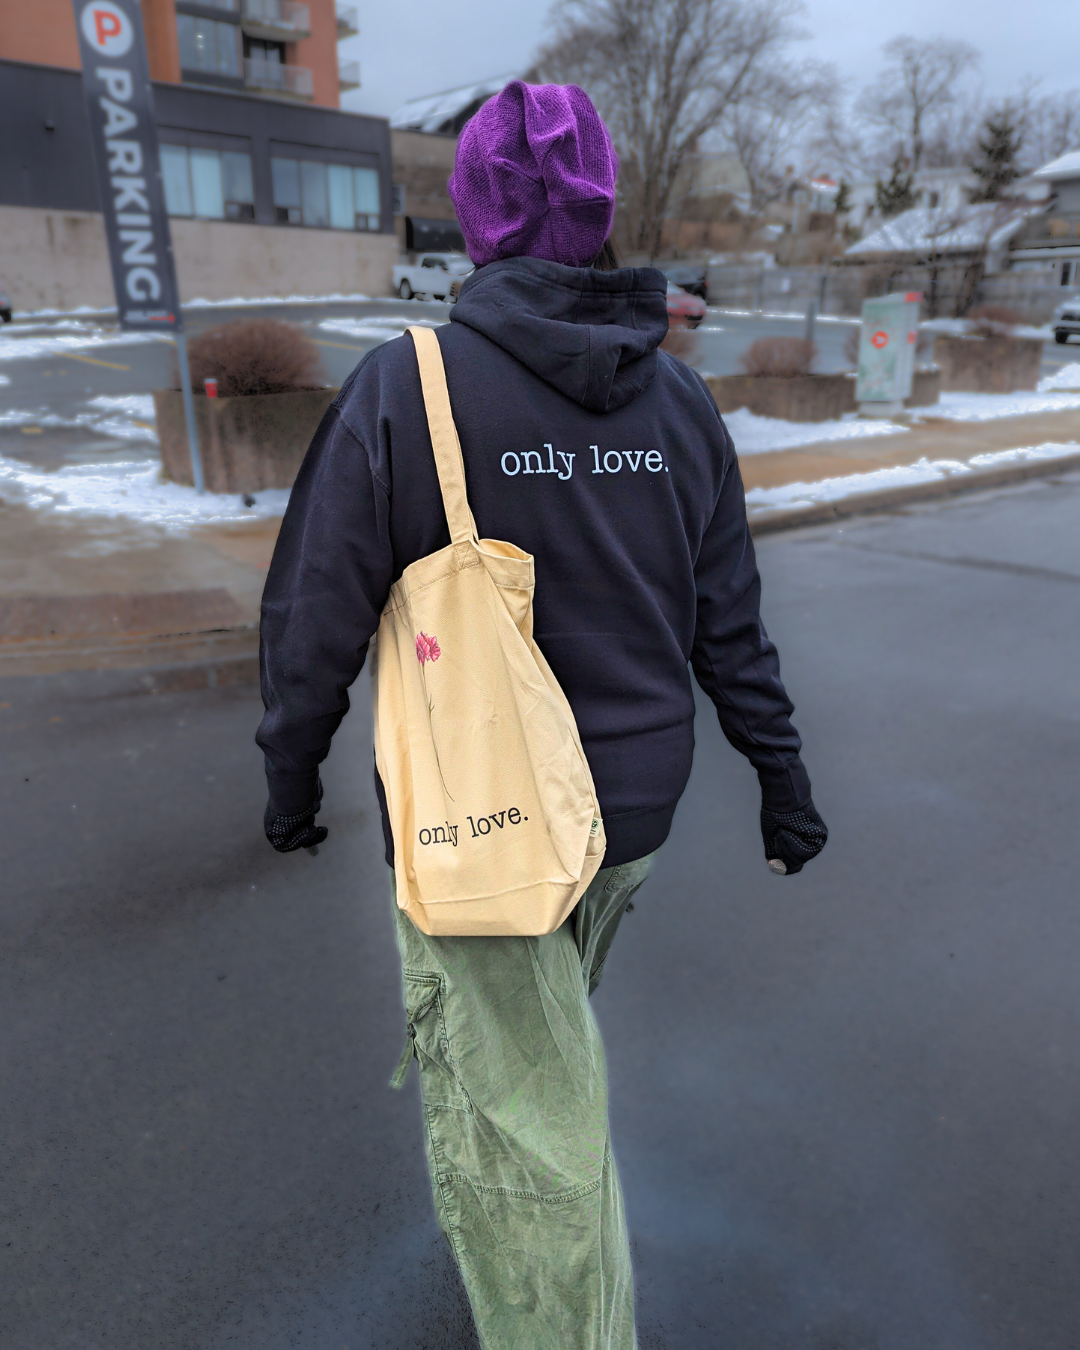 Only Love Black Unisex Hoodie and Pink Carnation Flower Eco Tote Bag on Artsy Model